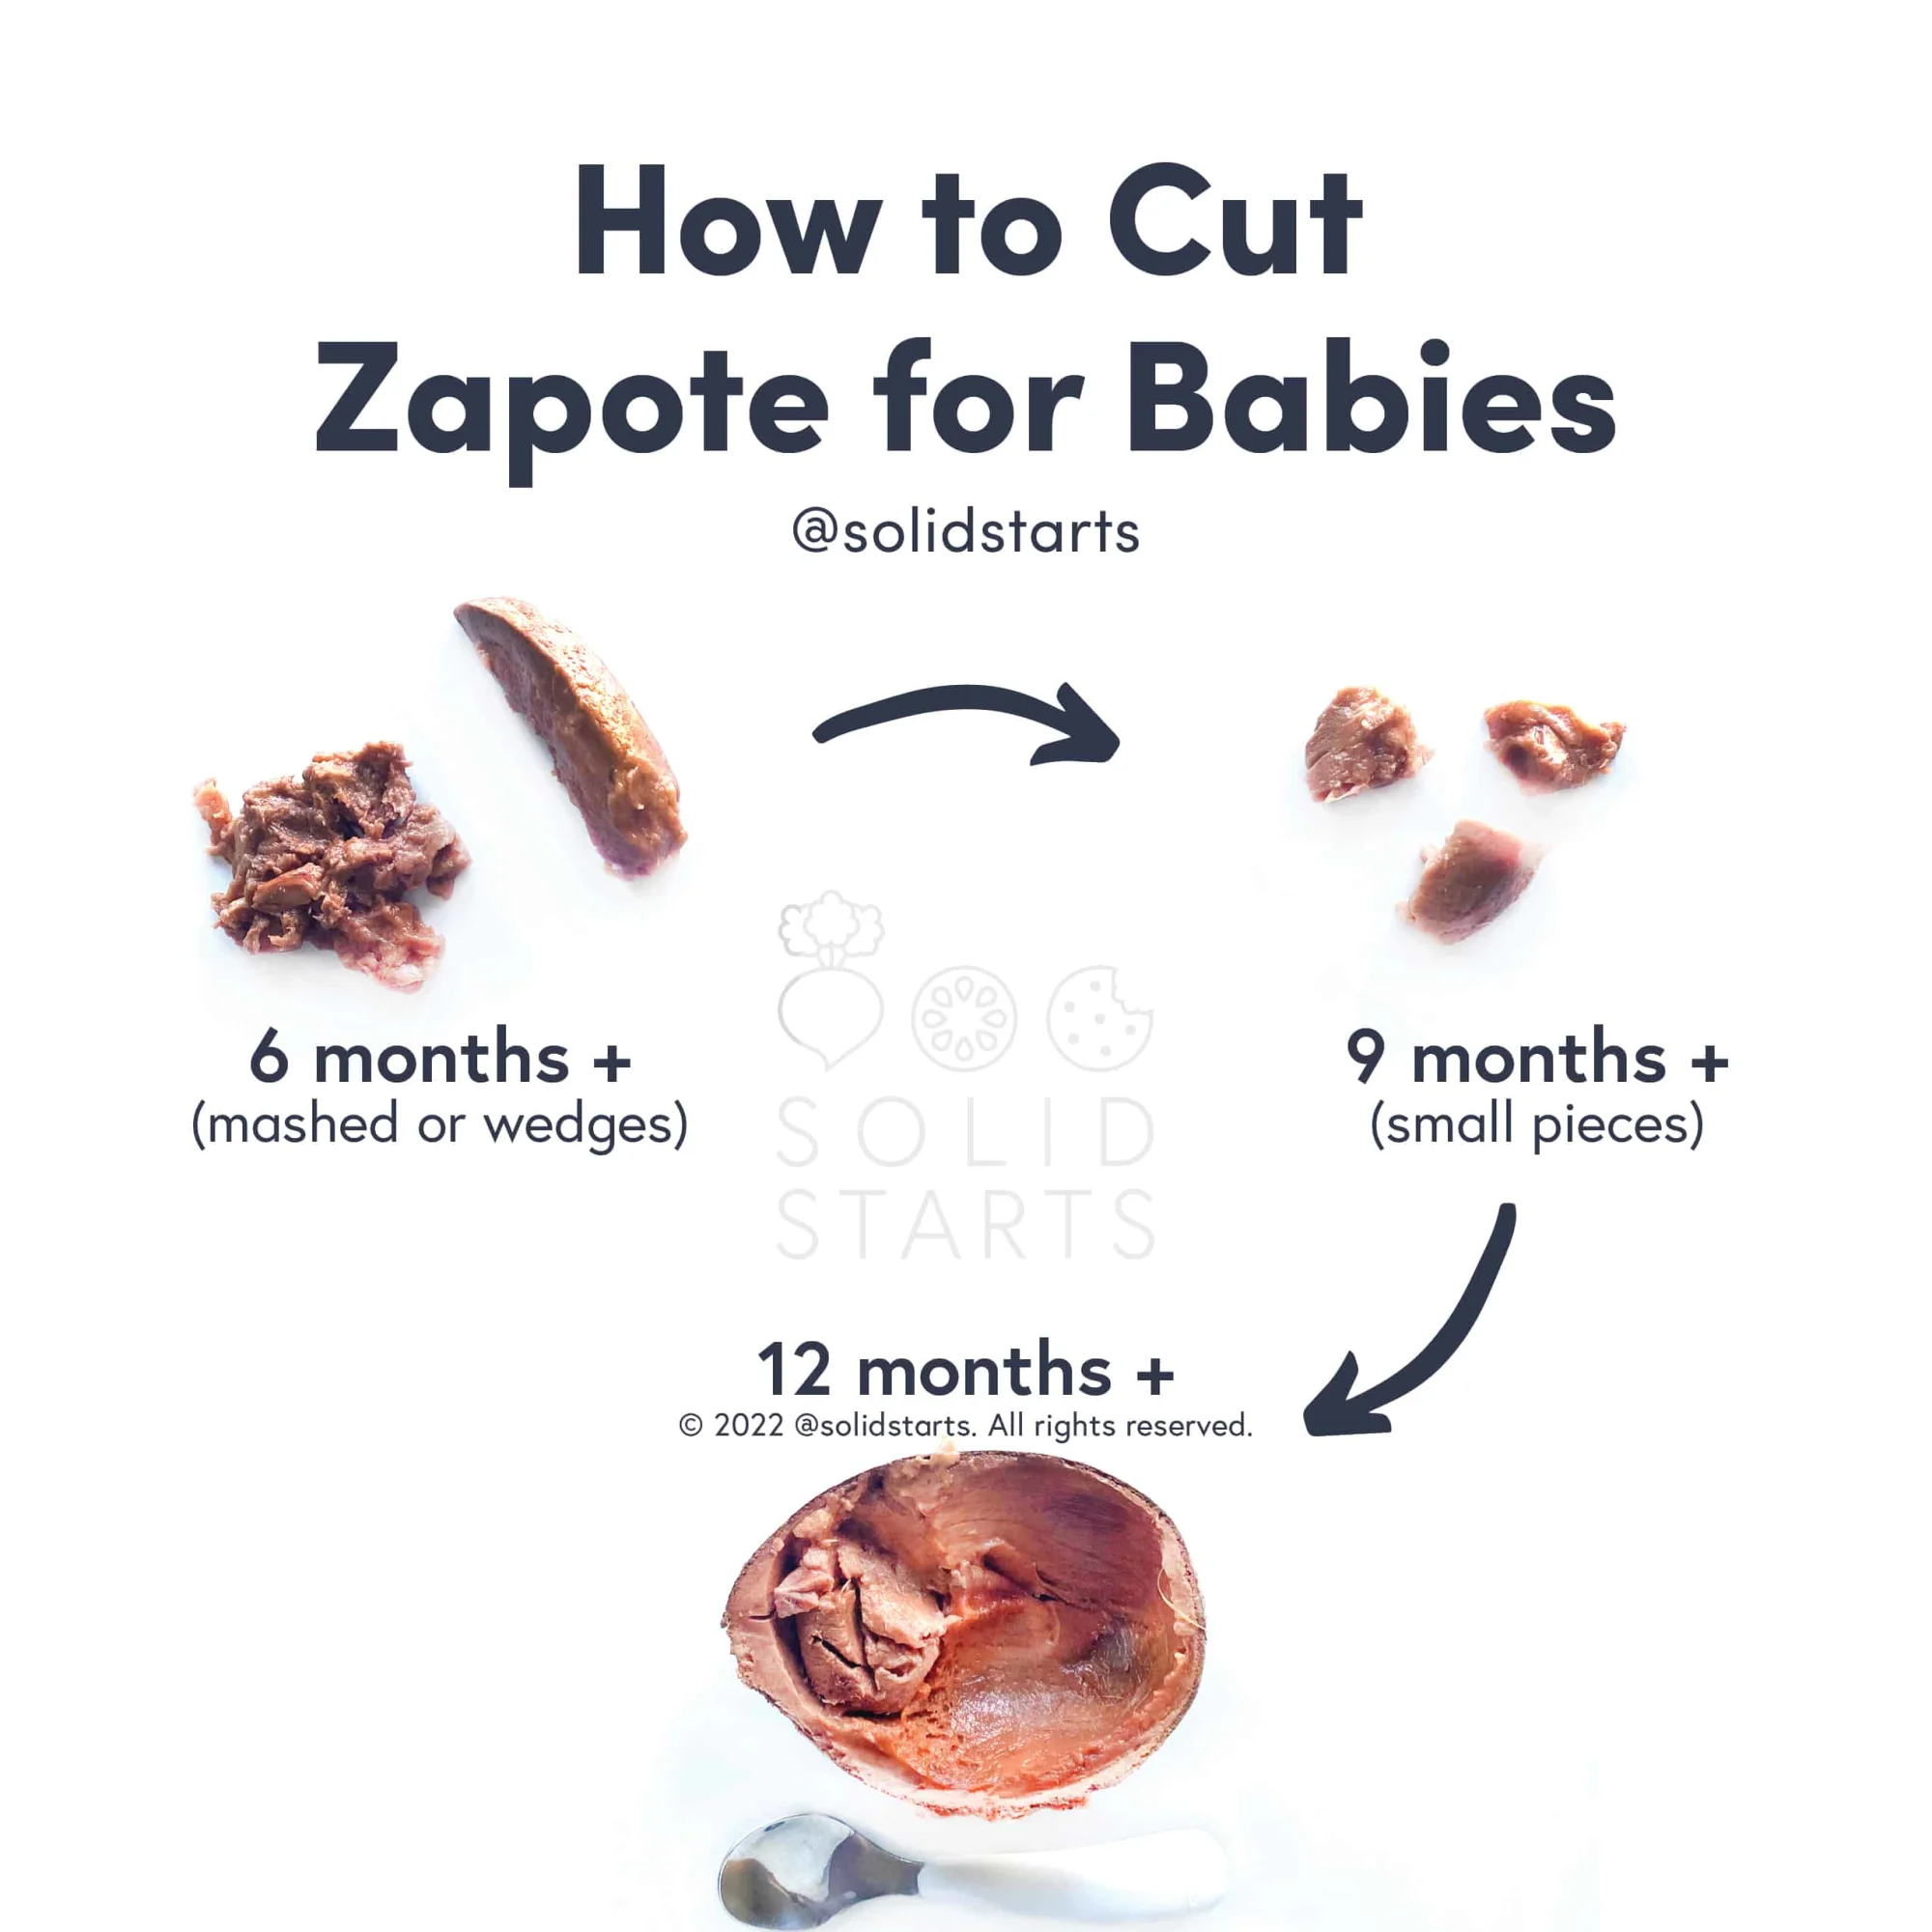 a Solid Starts infographic with the header How to Cut Zapote for Babies: mashed or wedges for 6 mos+, bite size pieces for 9 mos+, a half still in the skin with a spoon for 12 mos+